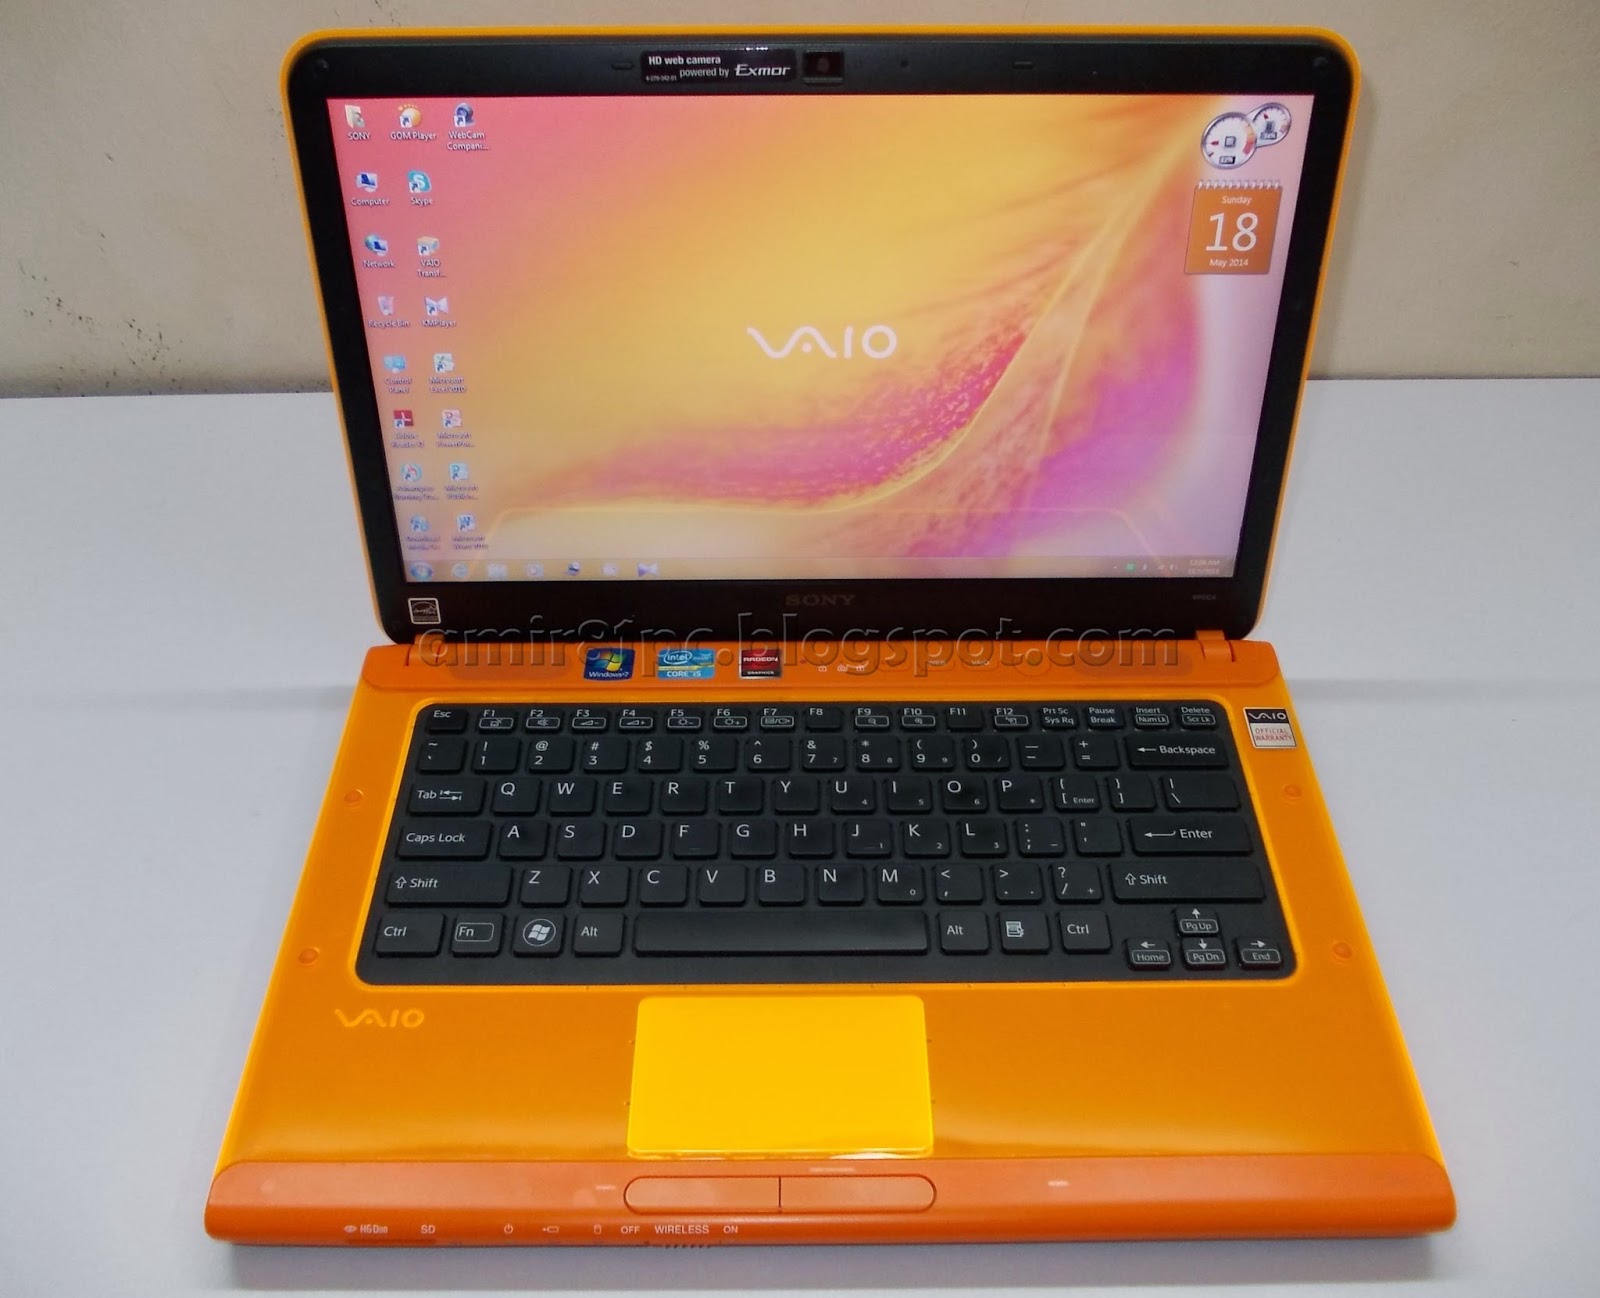 Three A Tech Computer Sales and Services: Used Laptop Sony Vaio C